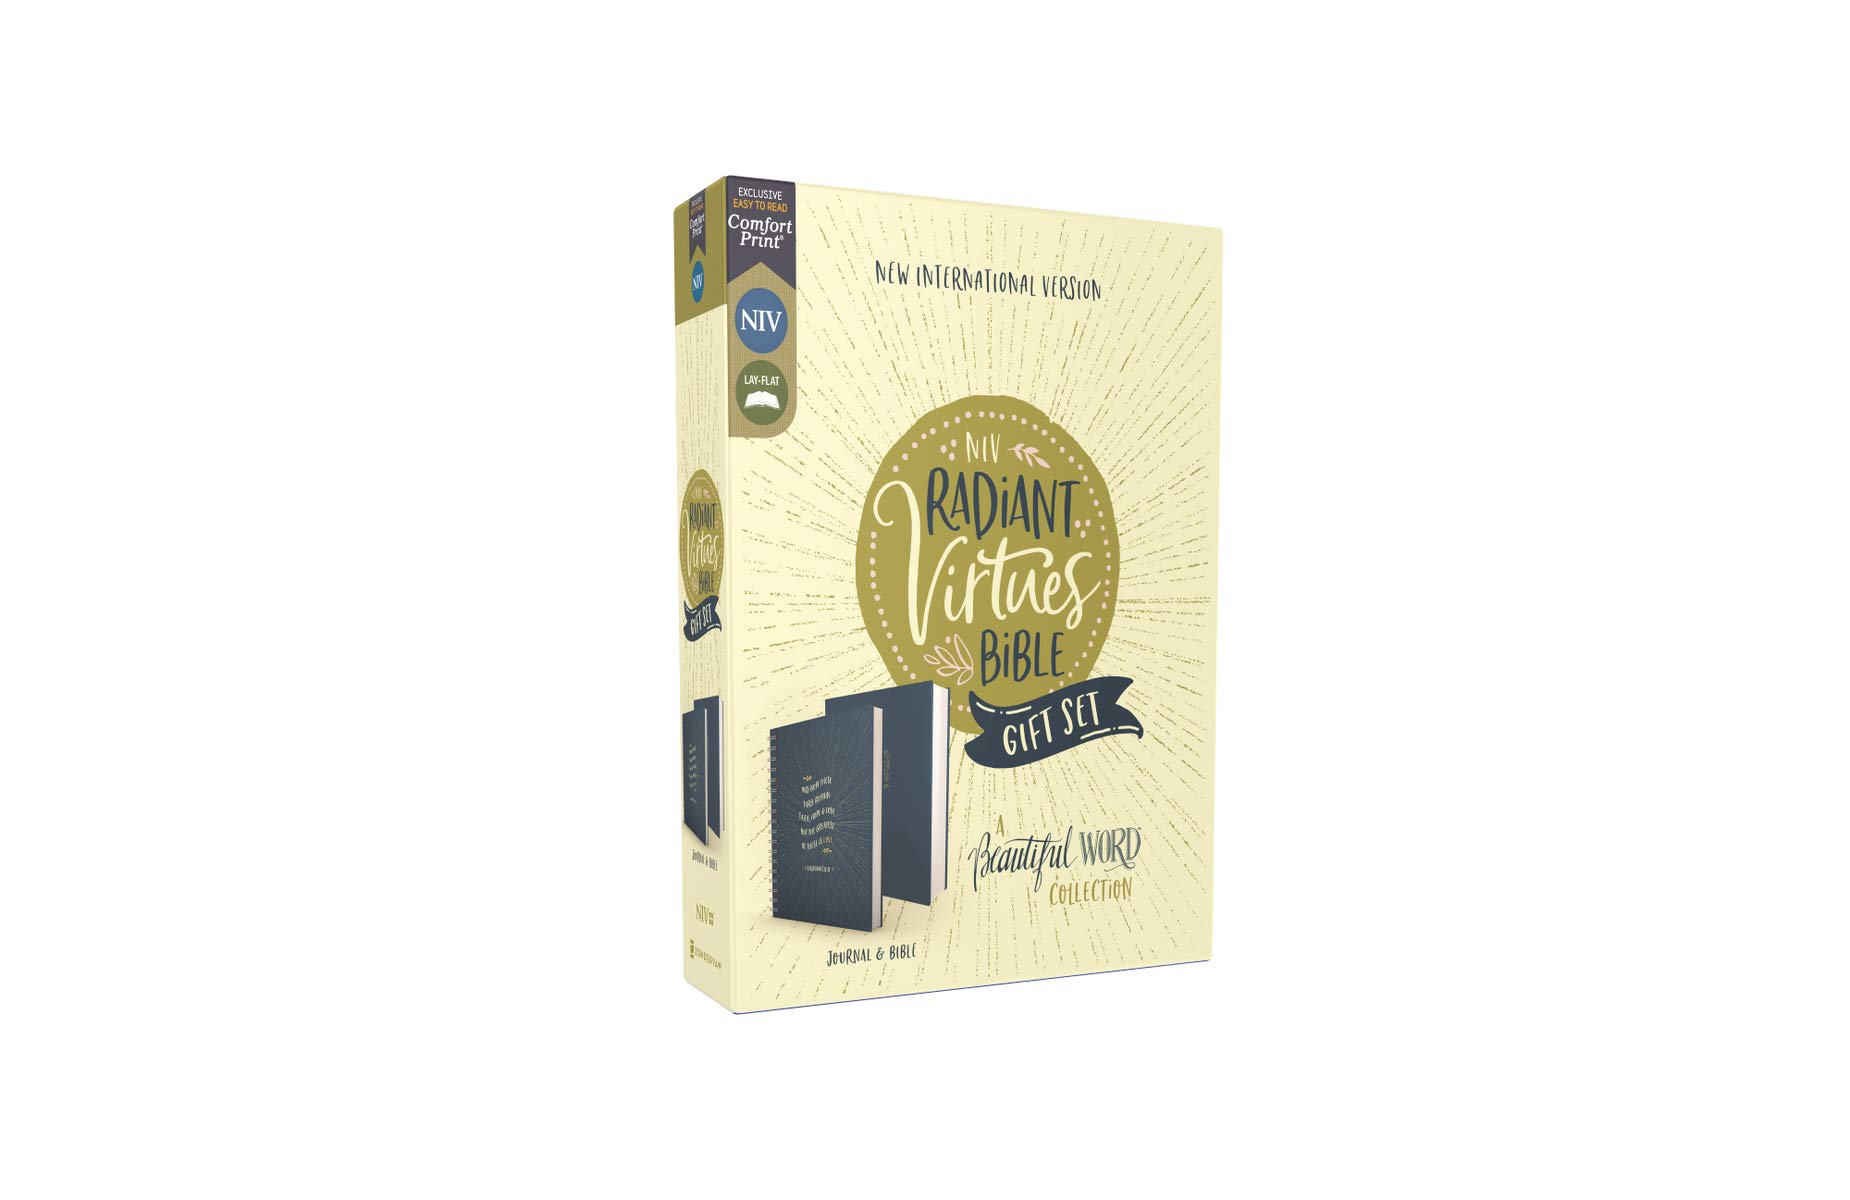 NIV, Radiant Virtues Bible: A Beautiful Word Collection, Hardcover Bible and Journal Gift Set, Red Letter, Comfort Print: Explore the virtues of faith, hope, and love